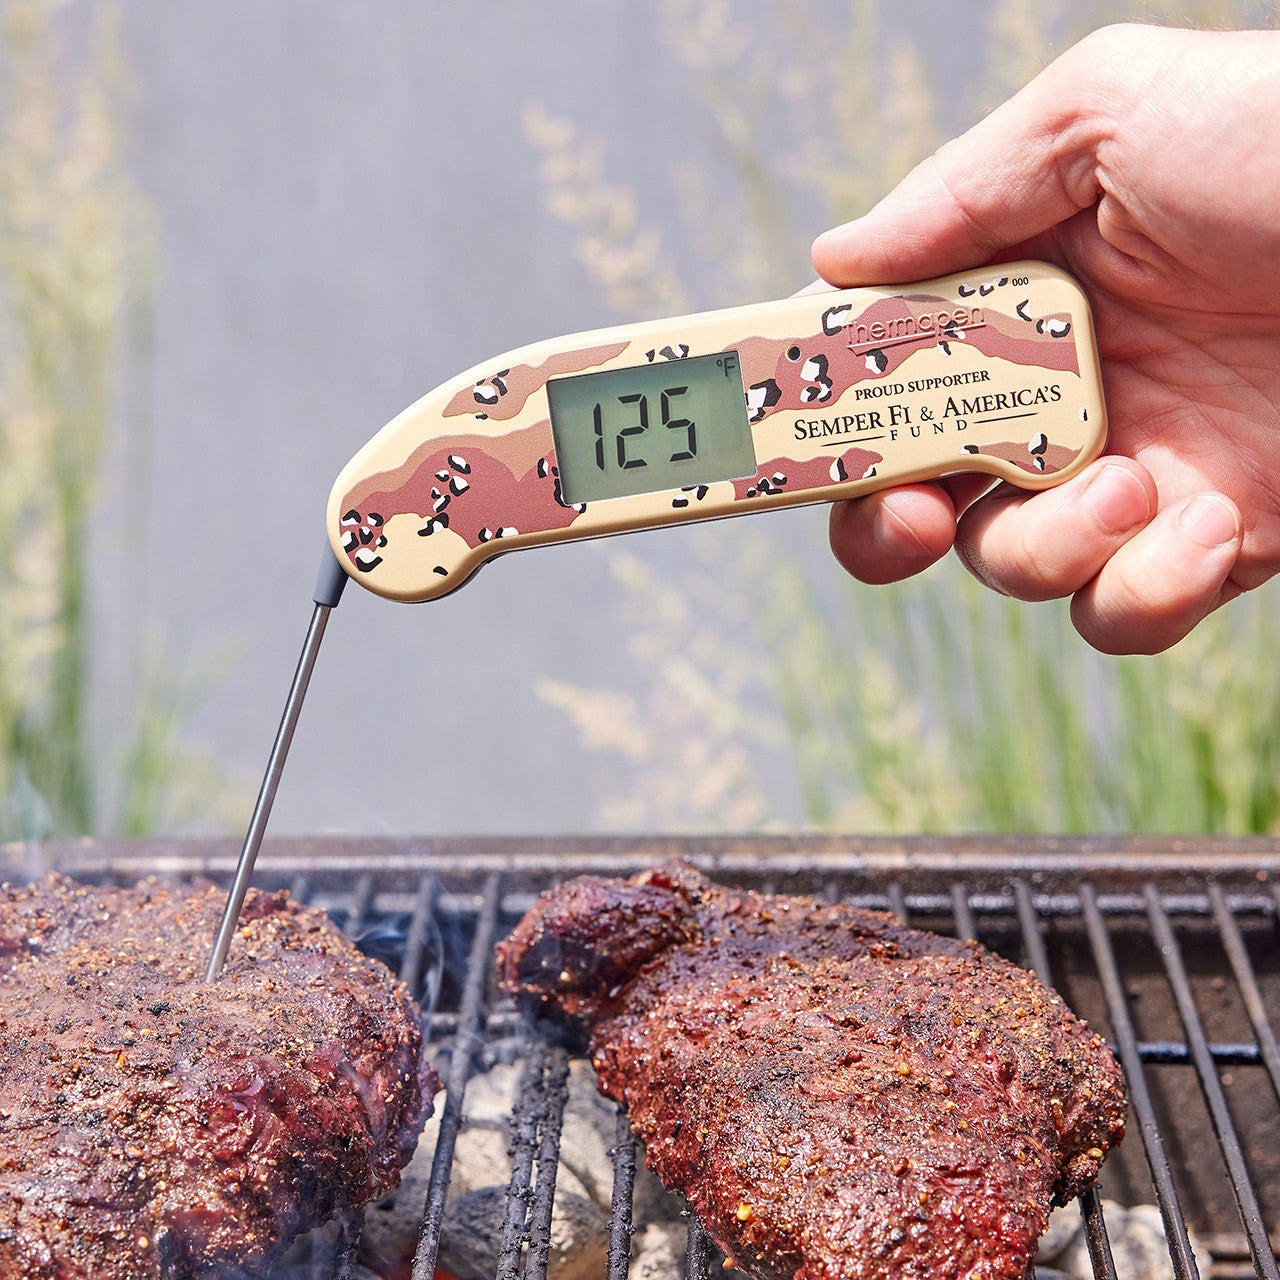 Thermapen One Desert Battle Camo Thermometer ThermoWorks Indigo Pool Patio BBQ